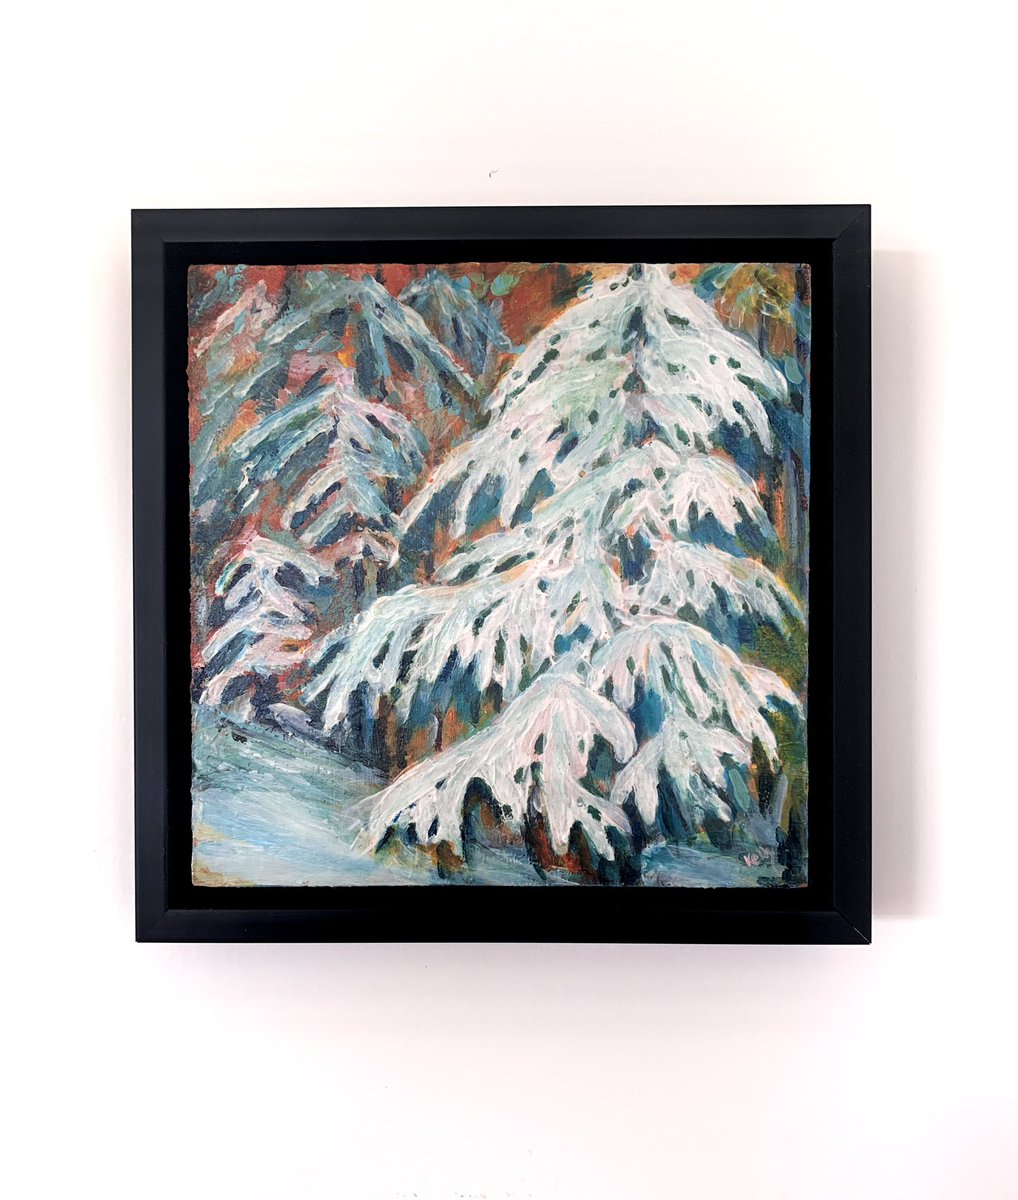 acrylic painting 7x7 framed to approximately 8.5x8.5” “When I Went Walking- Winter Forest “ #acrylicpainting #visualart #WomensArt #novascotia #canadianart #nature #snow #winter